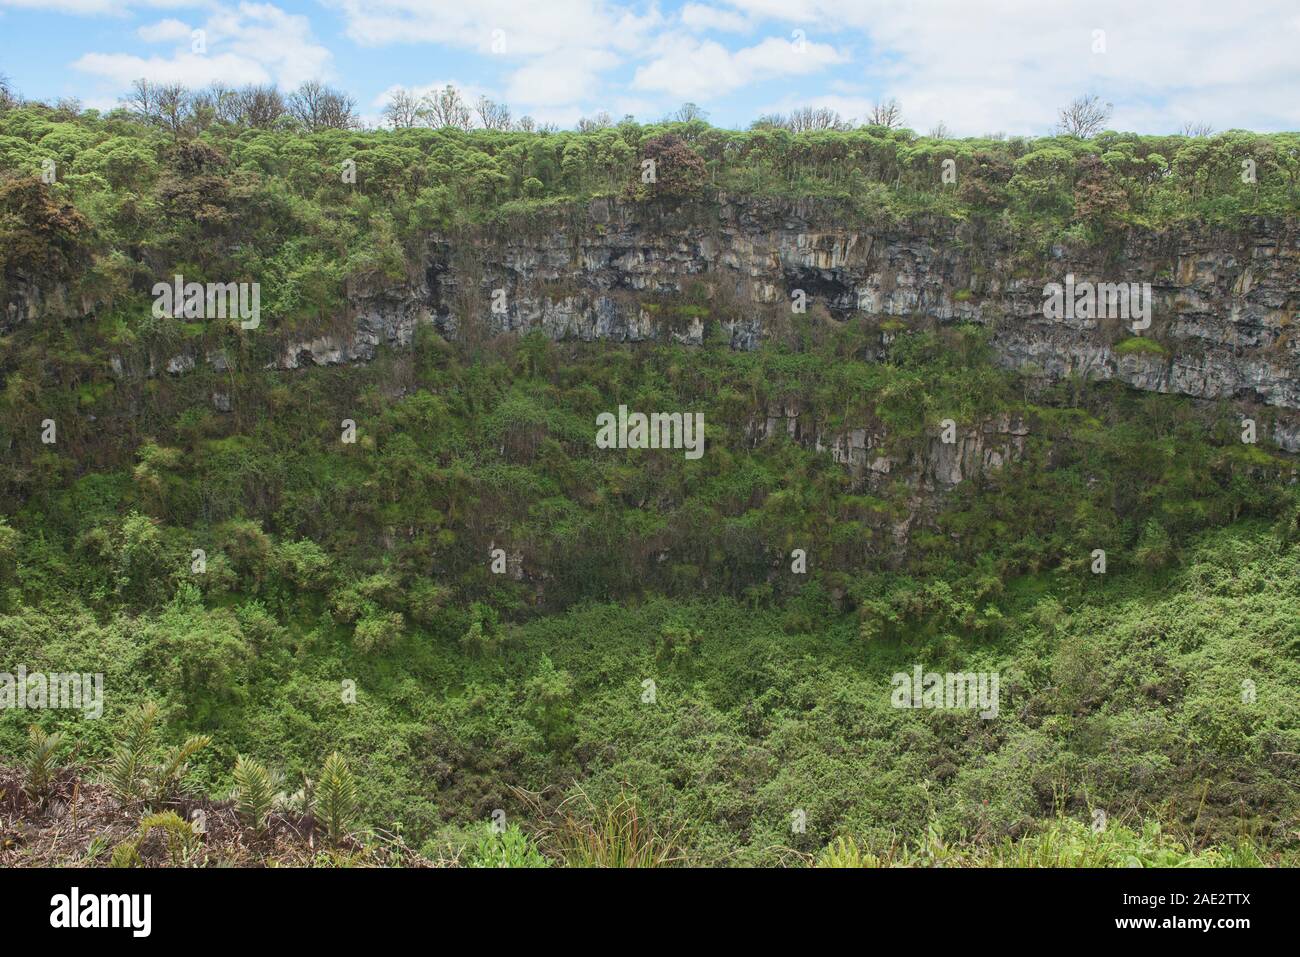 Los Gemelos volcanic sinkholes and Scalesia giant daisy trees, Galapagos Islands, Ecuador Stock Photo